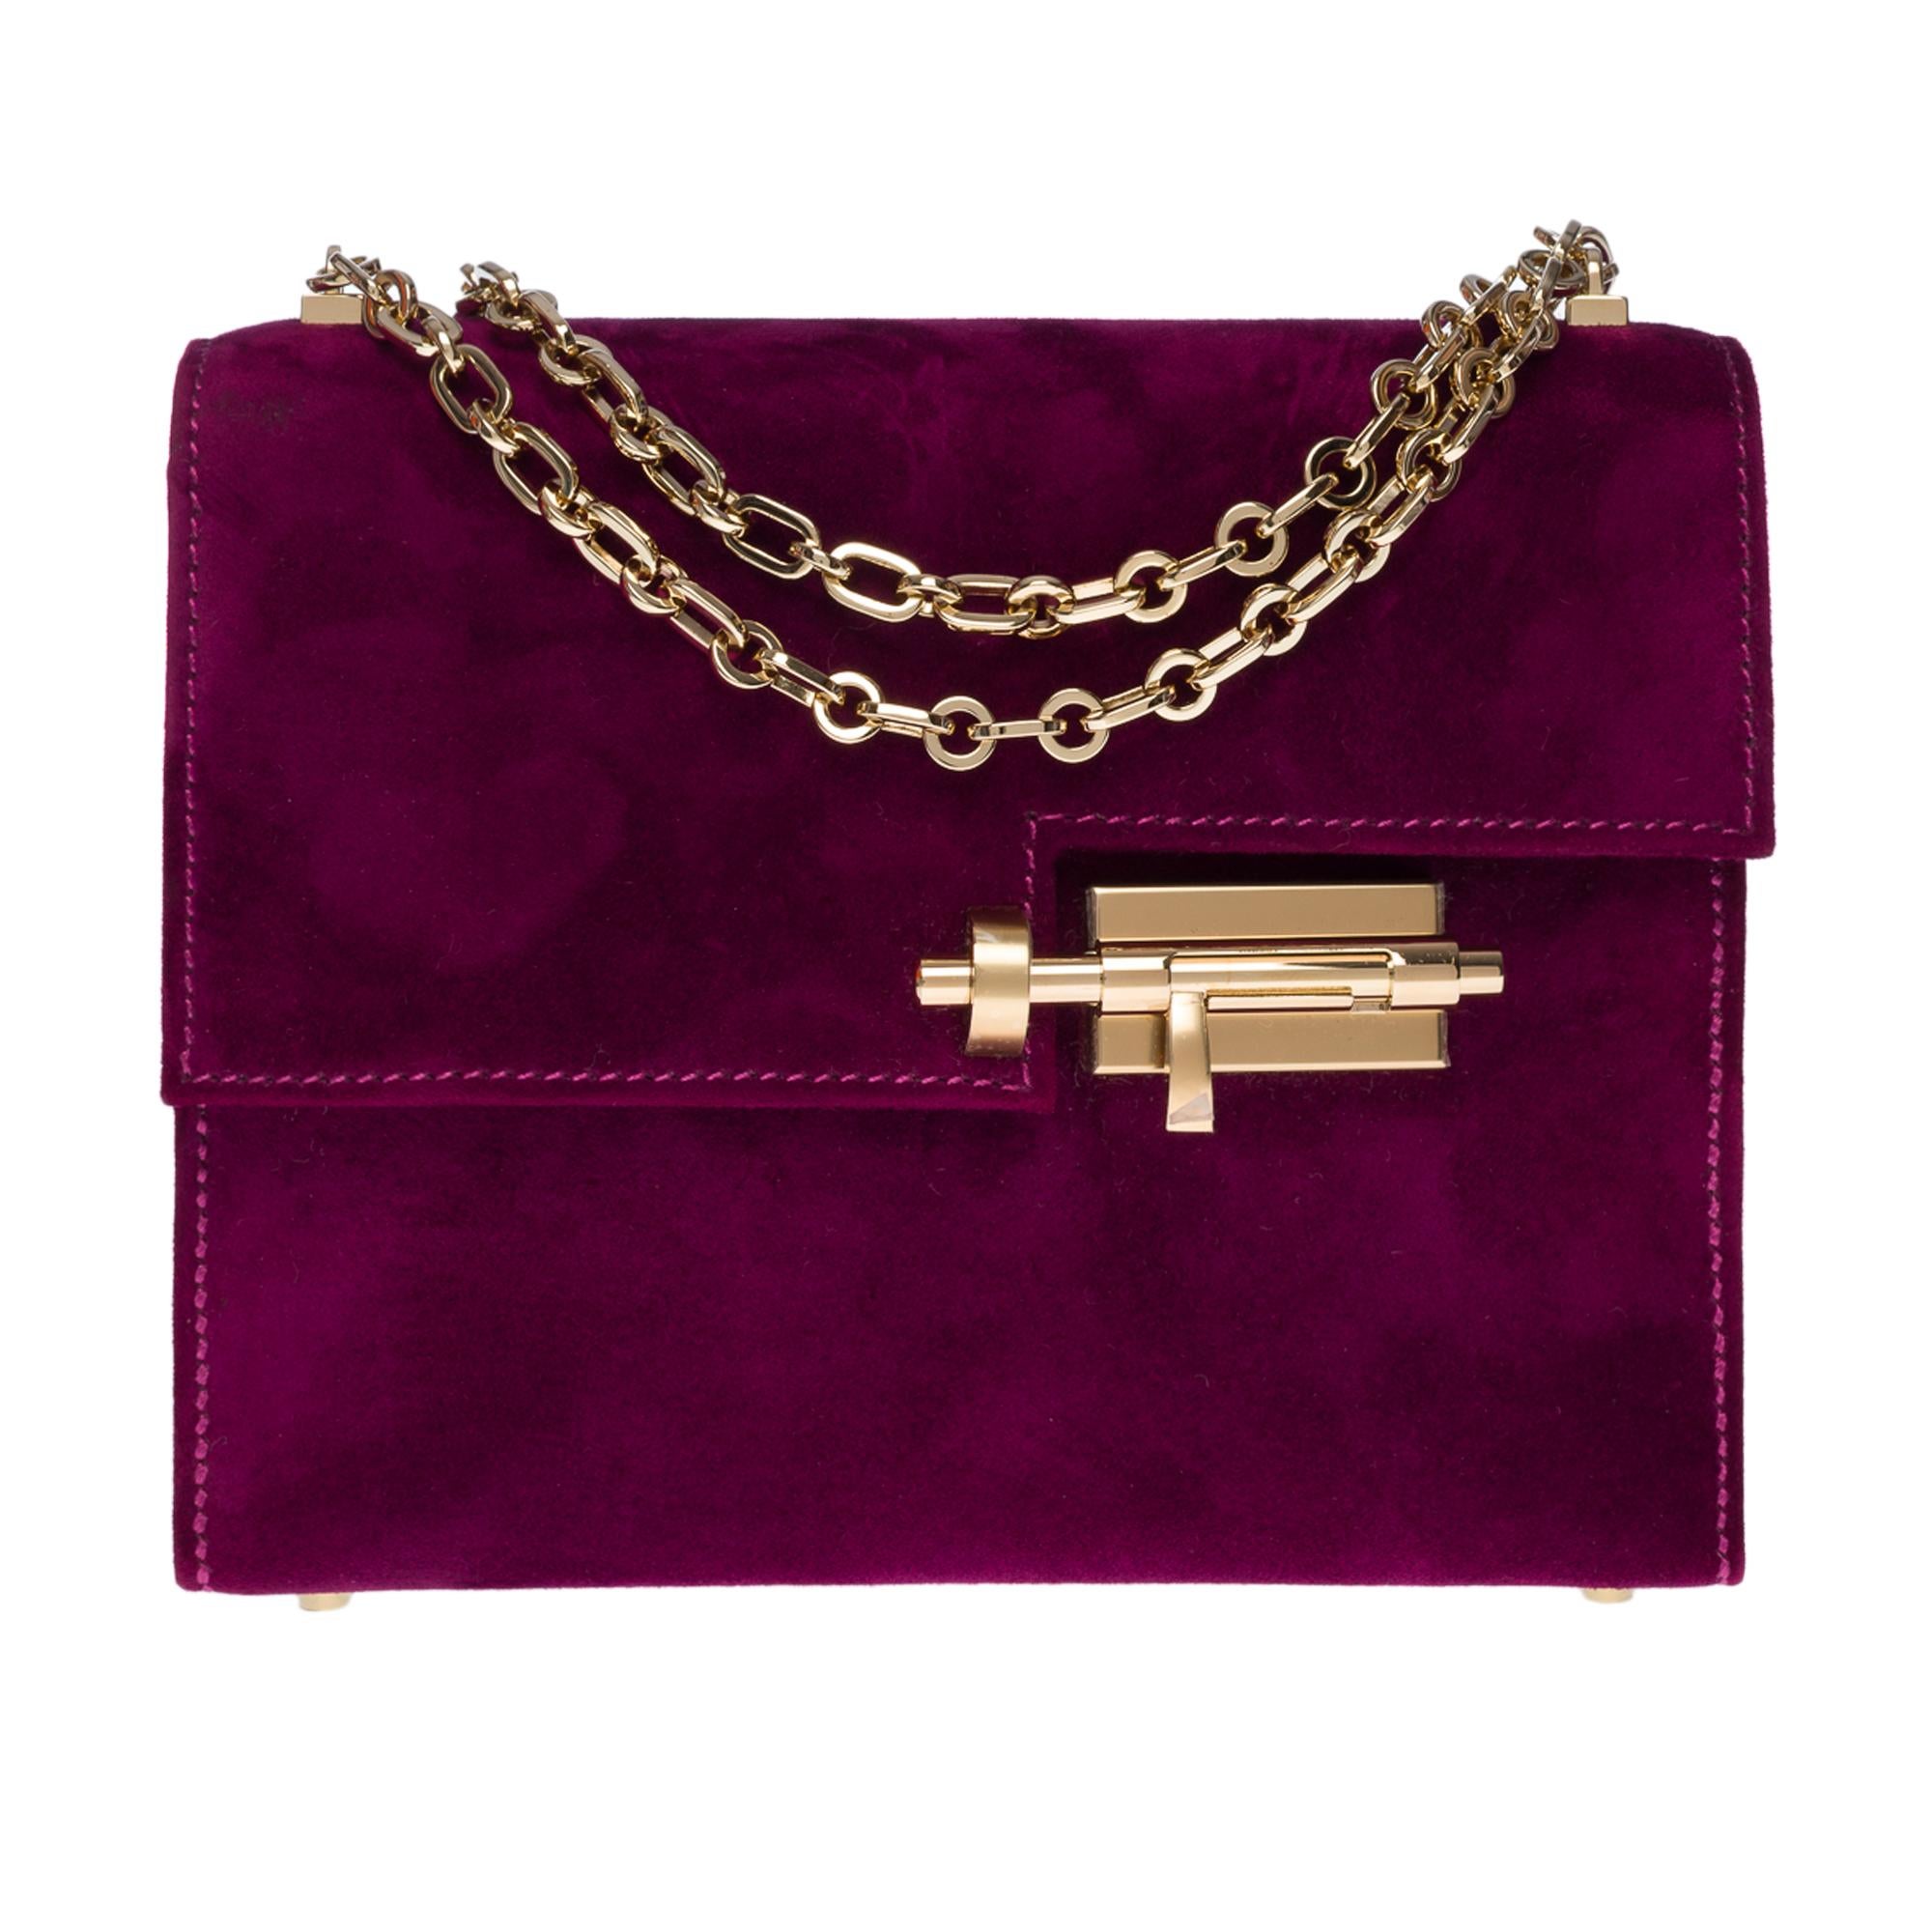 Beautiful limited edition HermèsVerrou Mini shoulder bag in Anemone (purple) Doblis calfskin, gold plated metal hardware, a gold plated metal chain handle allowing a shoulder or crossbody carry

Flap closure
Gold Metal Sliding Lock Clasp
Inner